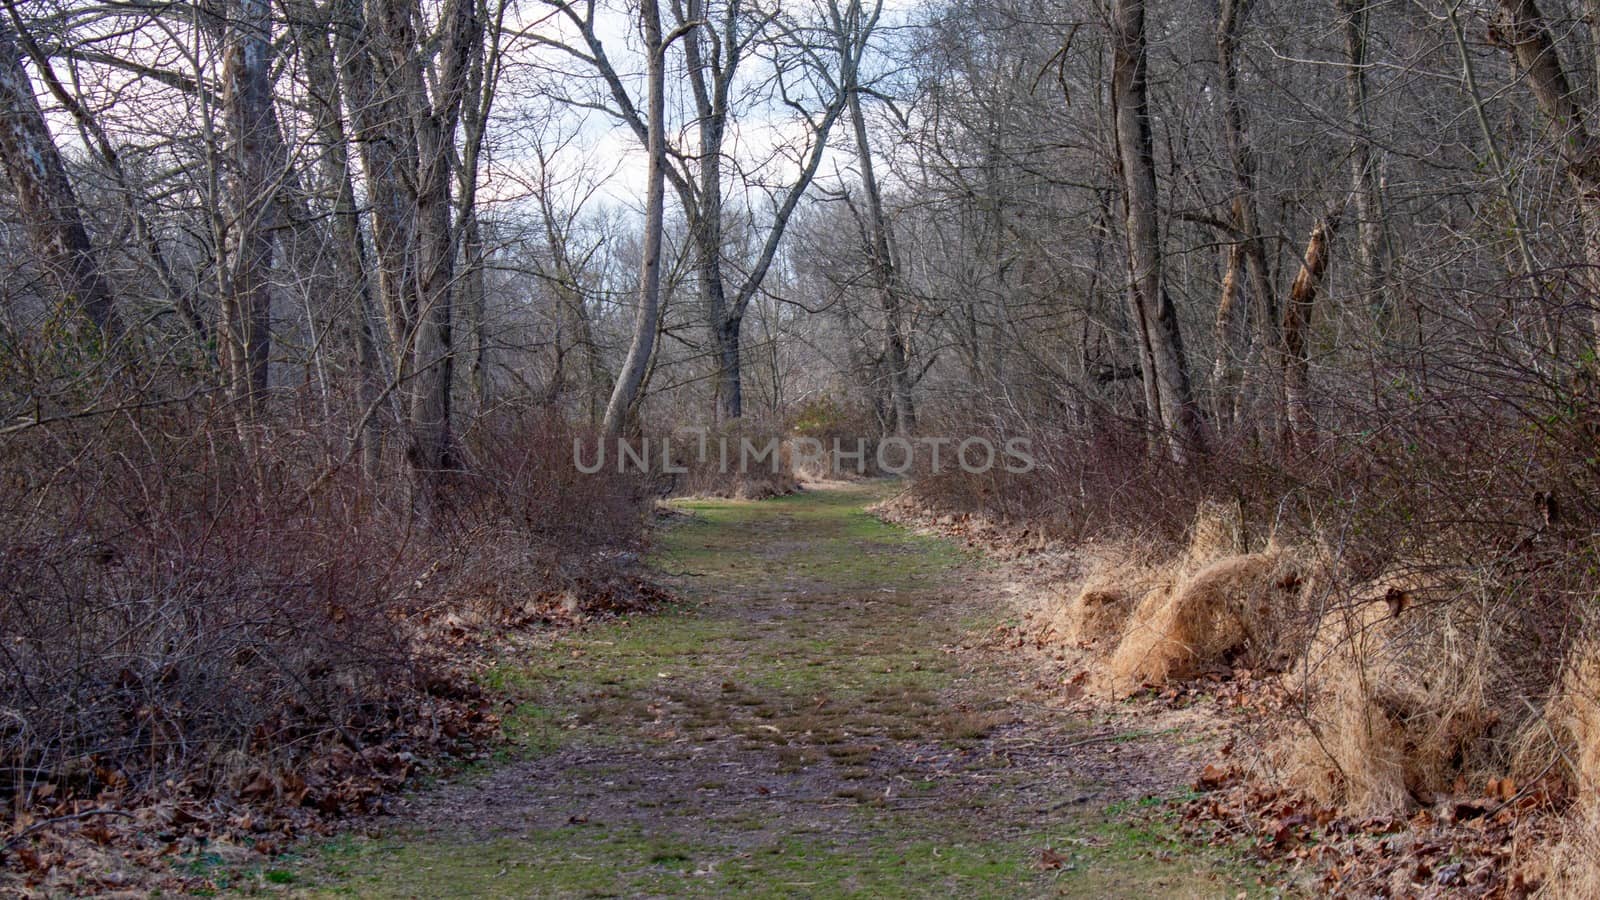 A Grassy Path Overgrown Path Covered in Foliage in a Winter Fore by bju12290